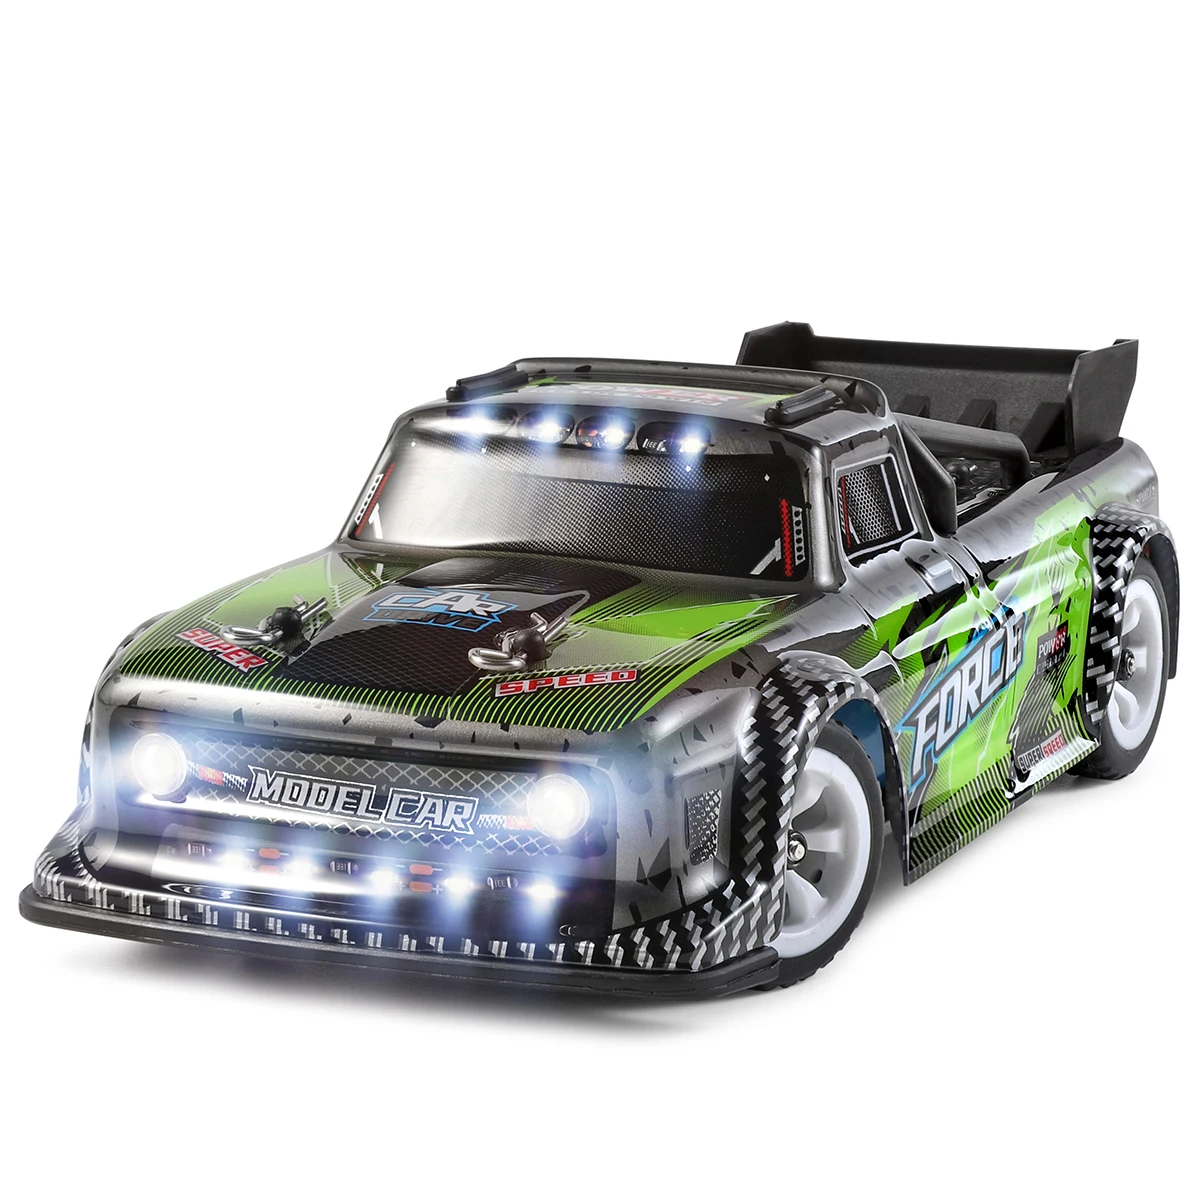 WLtoys 284131 K989 K969 2.4G Racing RC Car 30KM/H Metal Chassis 4WD Electric High Speed Remote Control Drift Car Toys for Kids enlarge